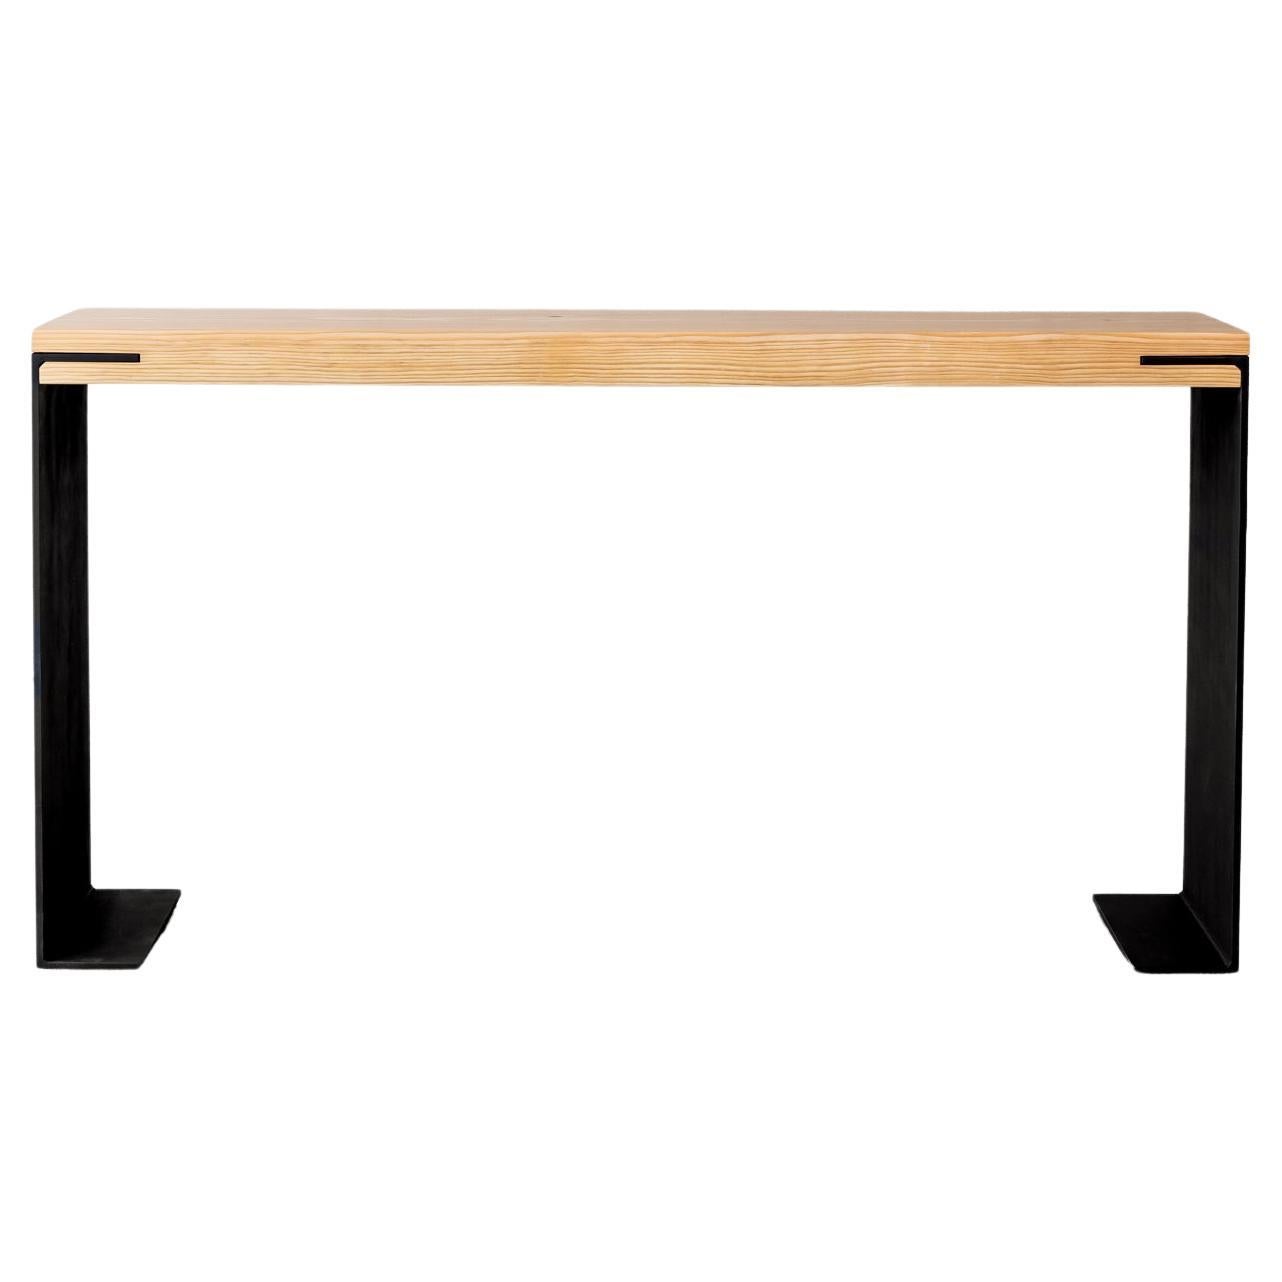 Kai Console with Modern Wood and Black Steel Legs by Autonomous Furniture